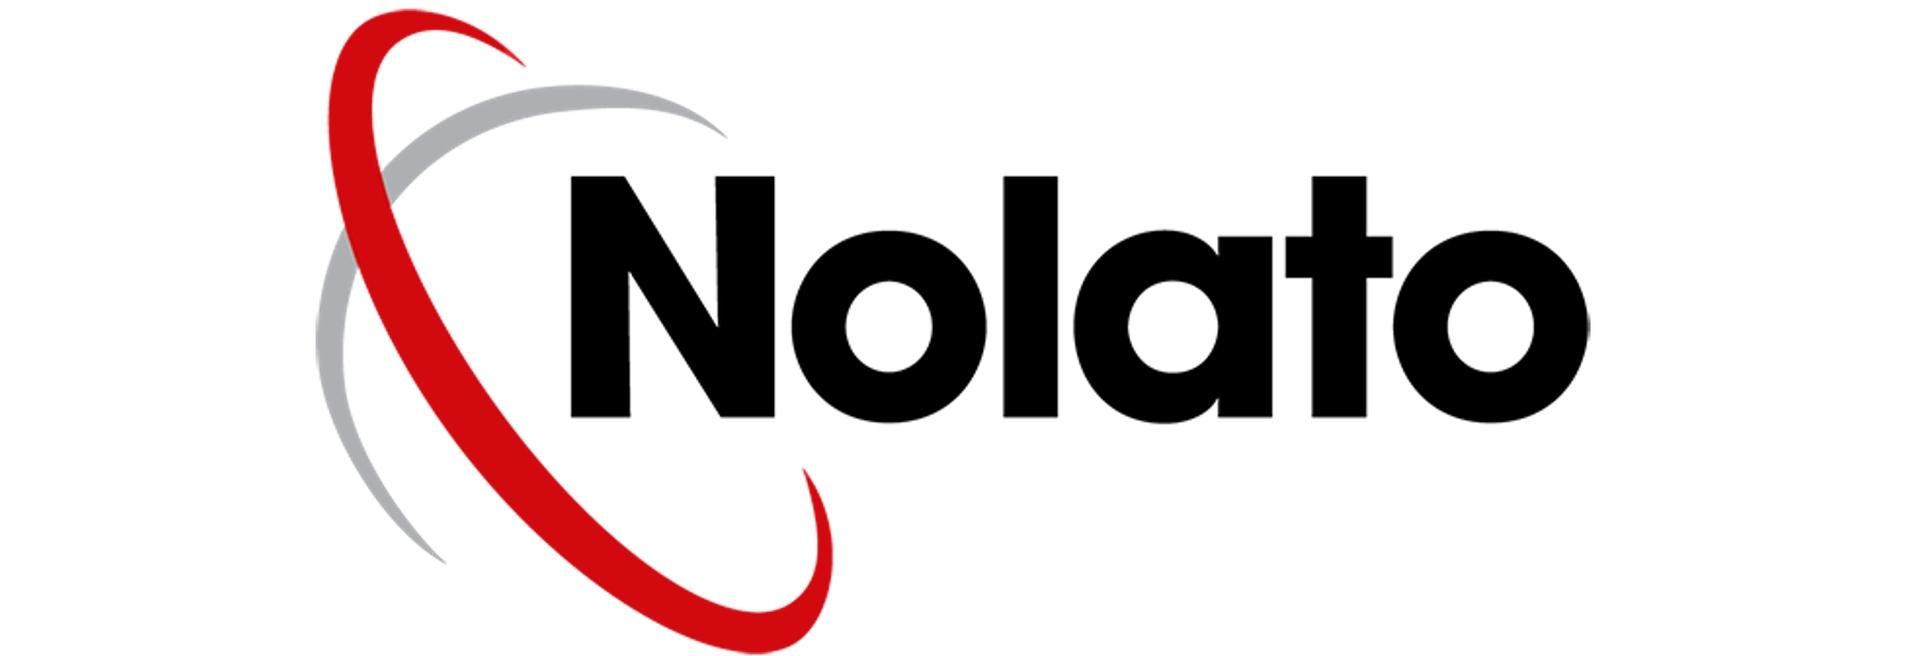 Swedish Nolato Group is to make one of their largest investments in Hungary - VIDEO REPORT